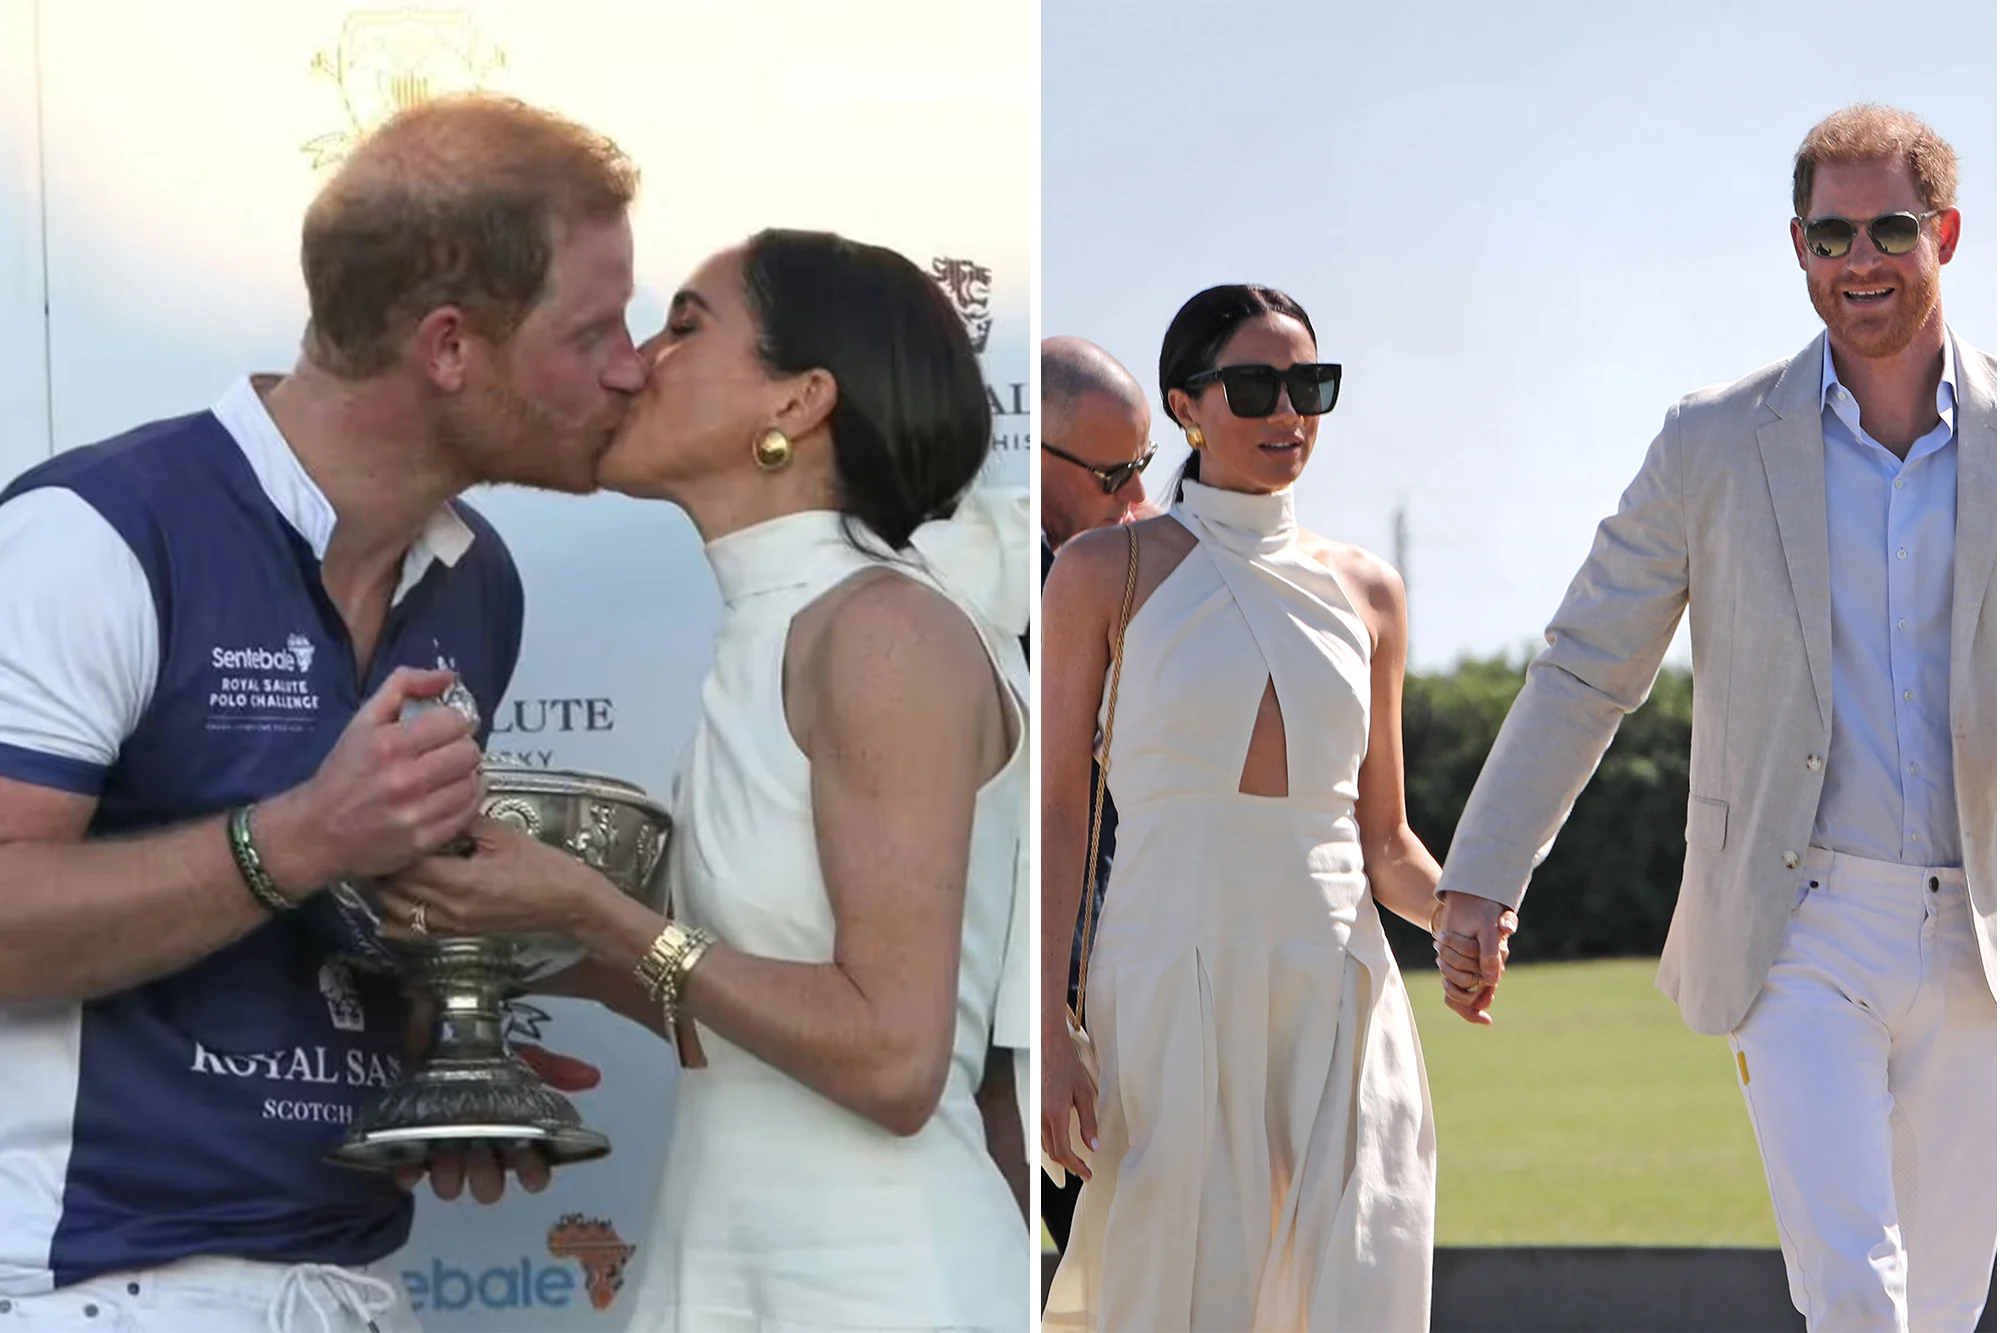 Duchess Meghan Gives Prince Harry a Sweet Kiss While Presenting Him with a Polo Trophy; Prince Harry and Meghan Markle’s kiss at a charity polo match in Miami on Friday was a genuine public display of affection